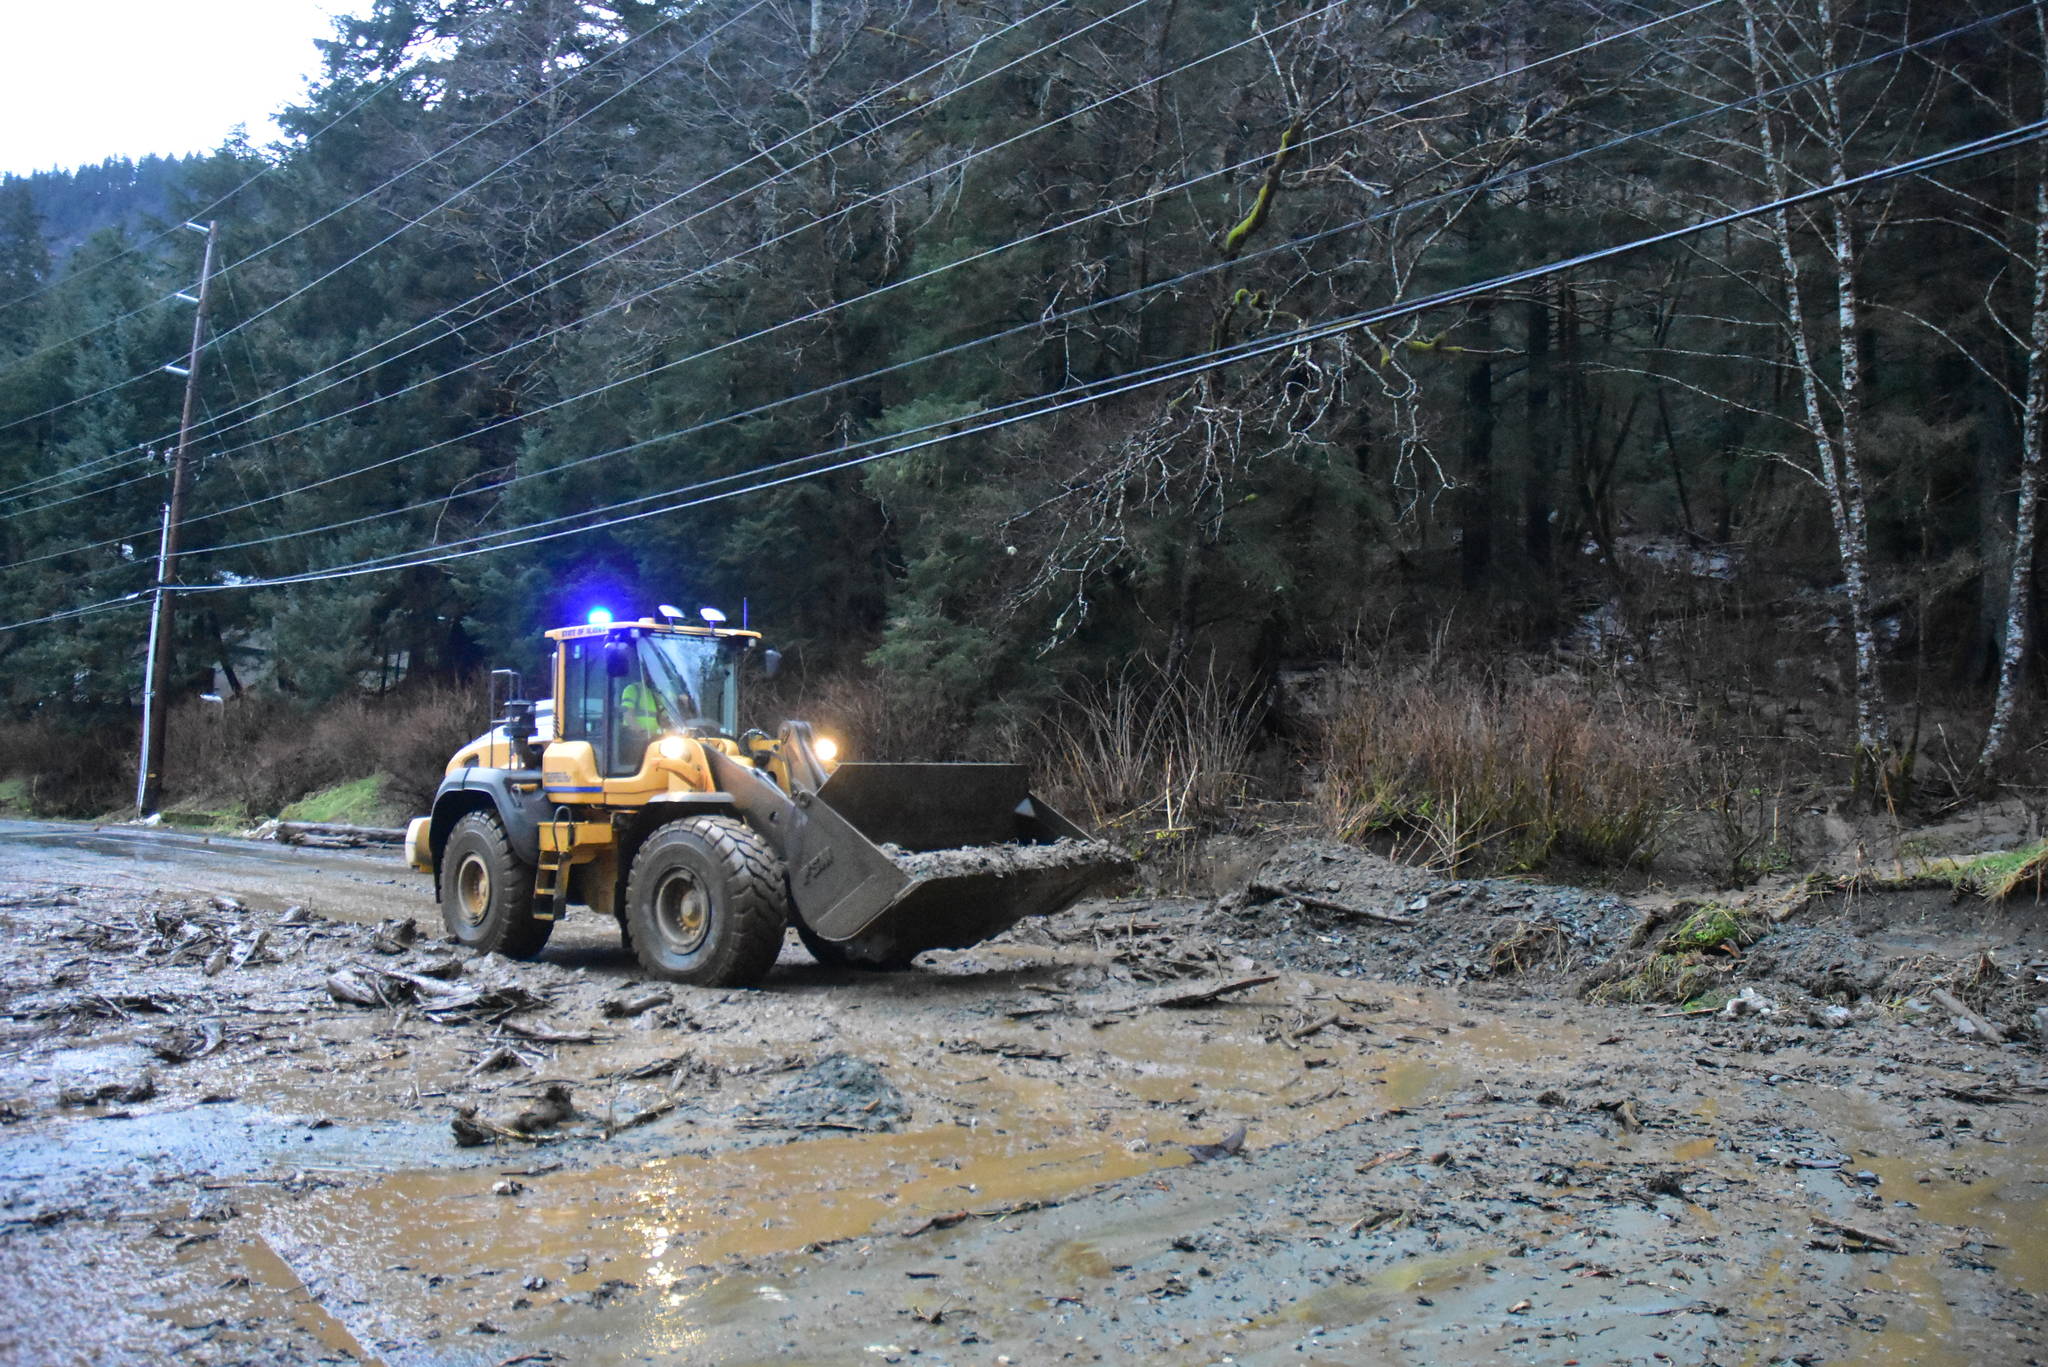 Heavy rains overnight caused a mudslide to wash across Glacier Highway just after 8 a.m. Wednesday, Dec. 2, 2020, partially flooding nearby buildings. (Peter Segall / Juneau Empire)